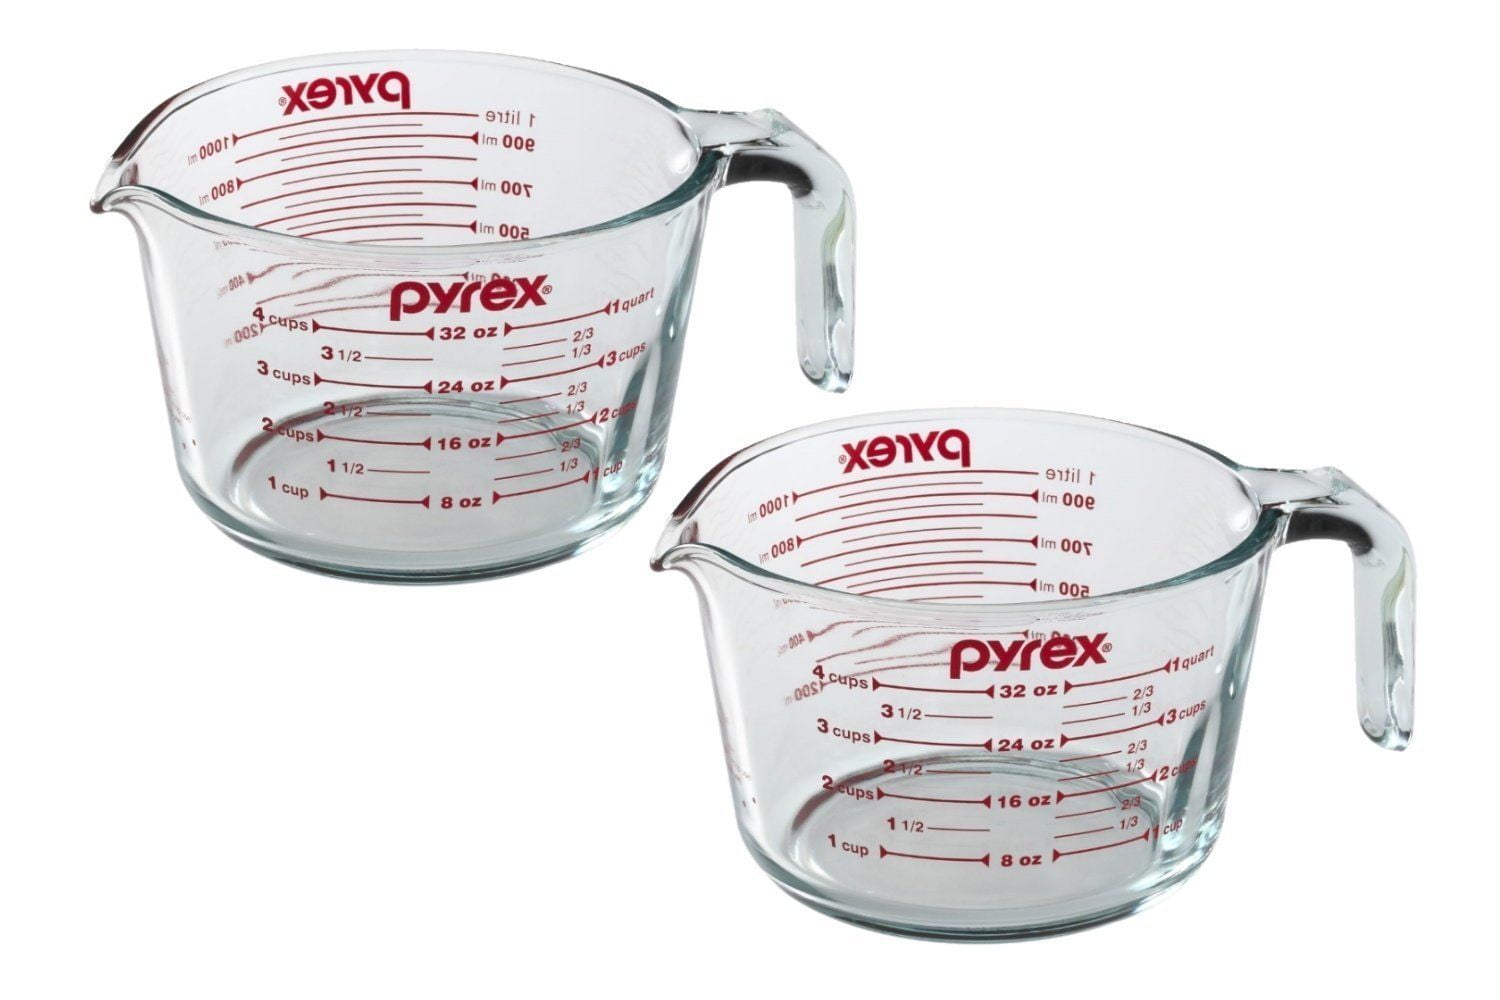 Pyrex 4-cup Measuring Cup – Good's Store Online